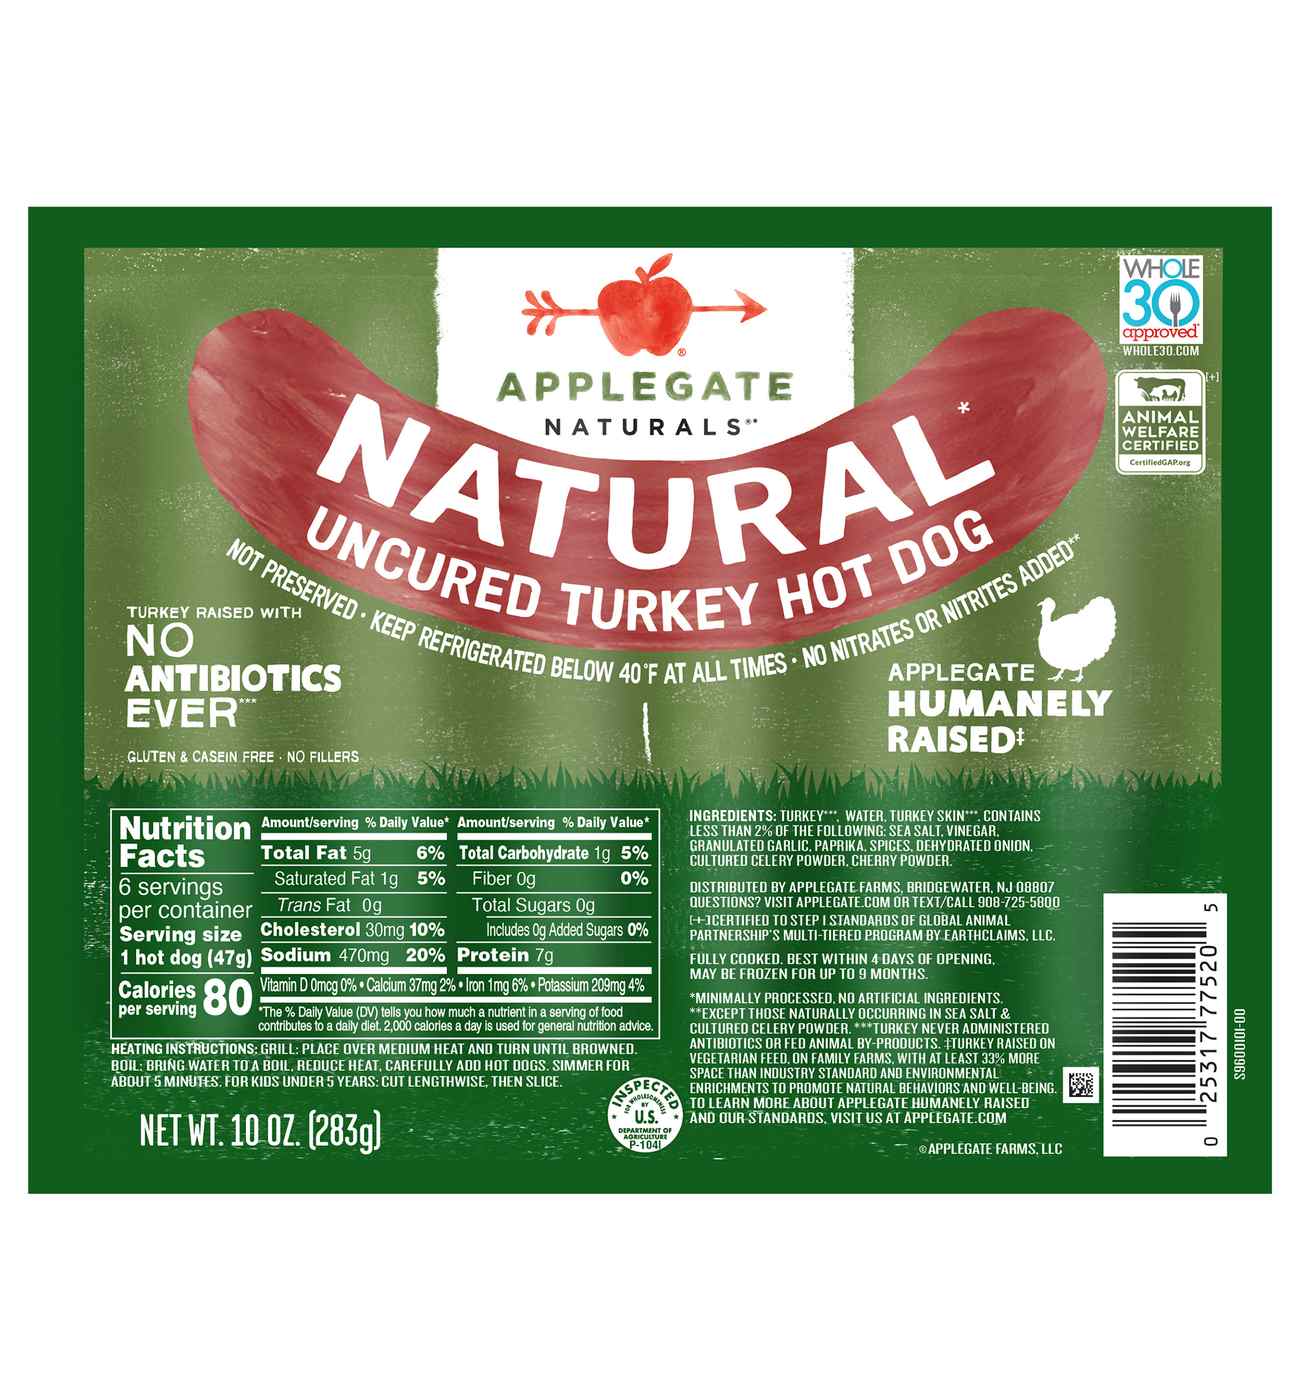 Applegate Naturals Uncured Turkey Hot Dogs; image 1 of 3